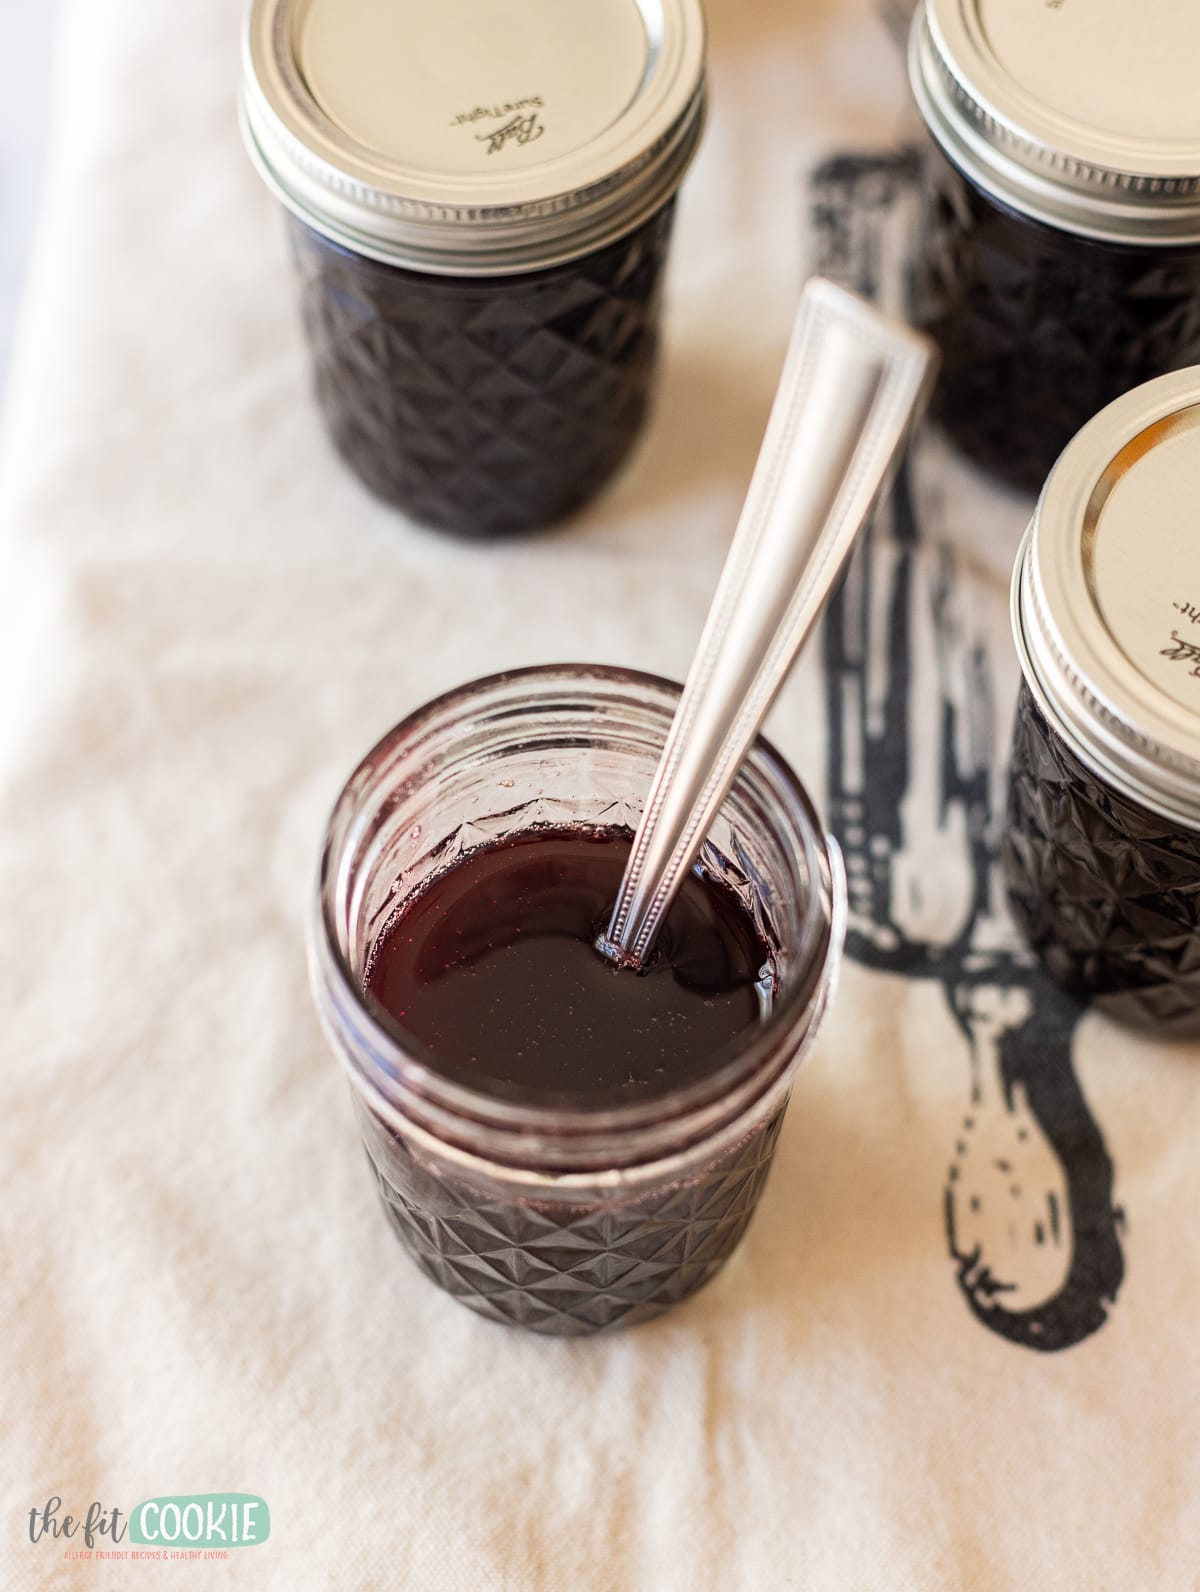 Jars of chokecherry syrup with a spoon in them.